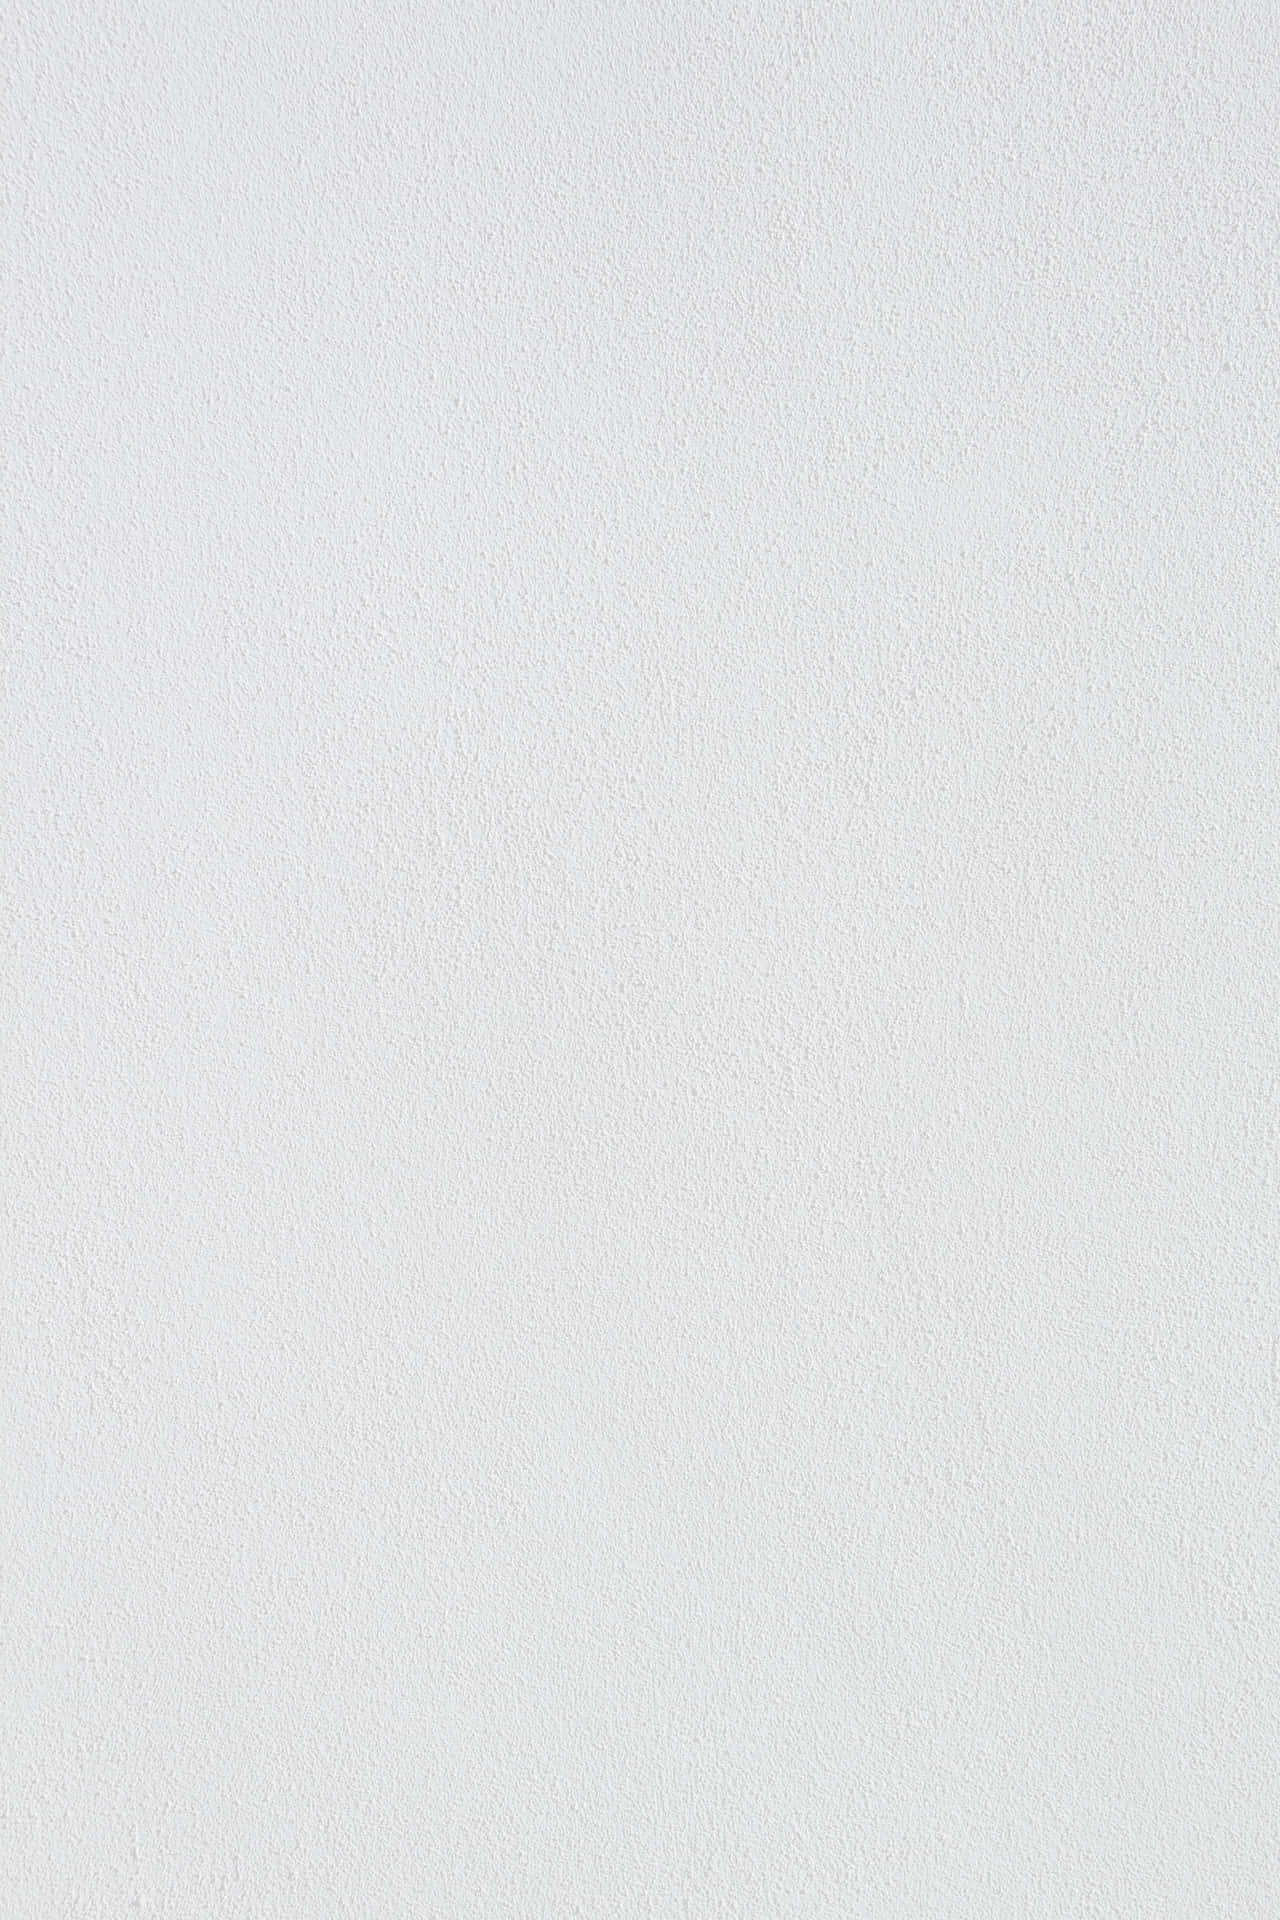 White Wall Background With Feint Rough Texture